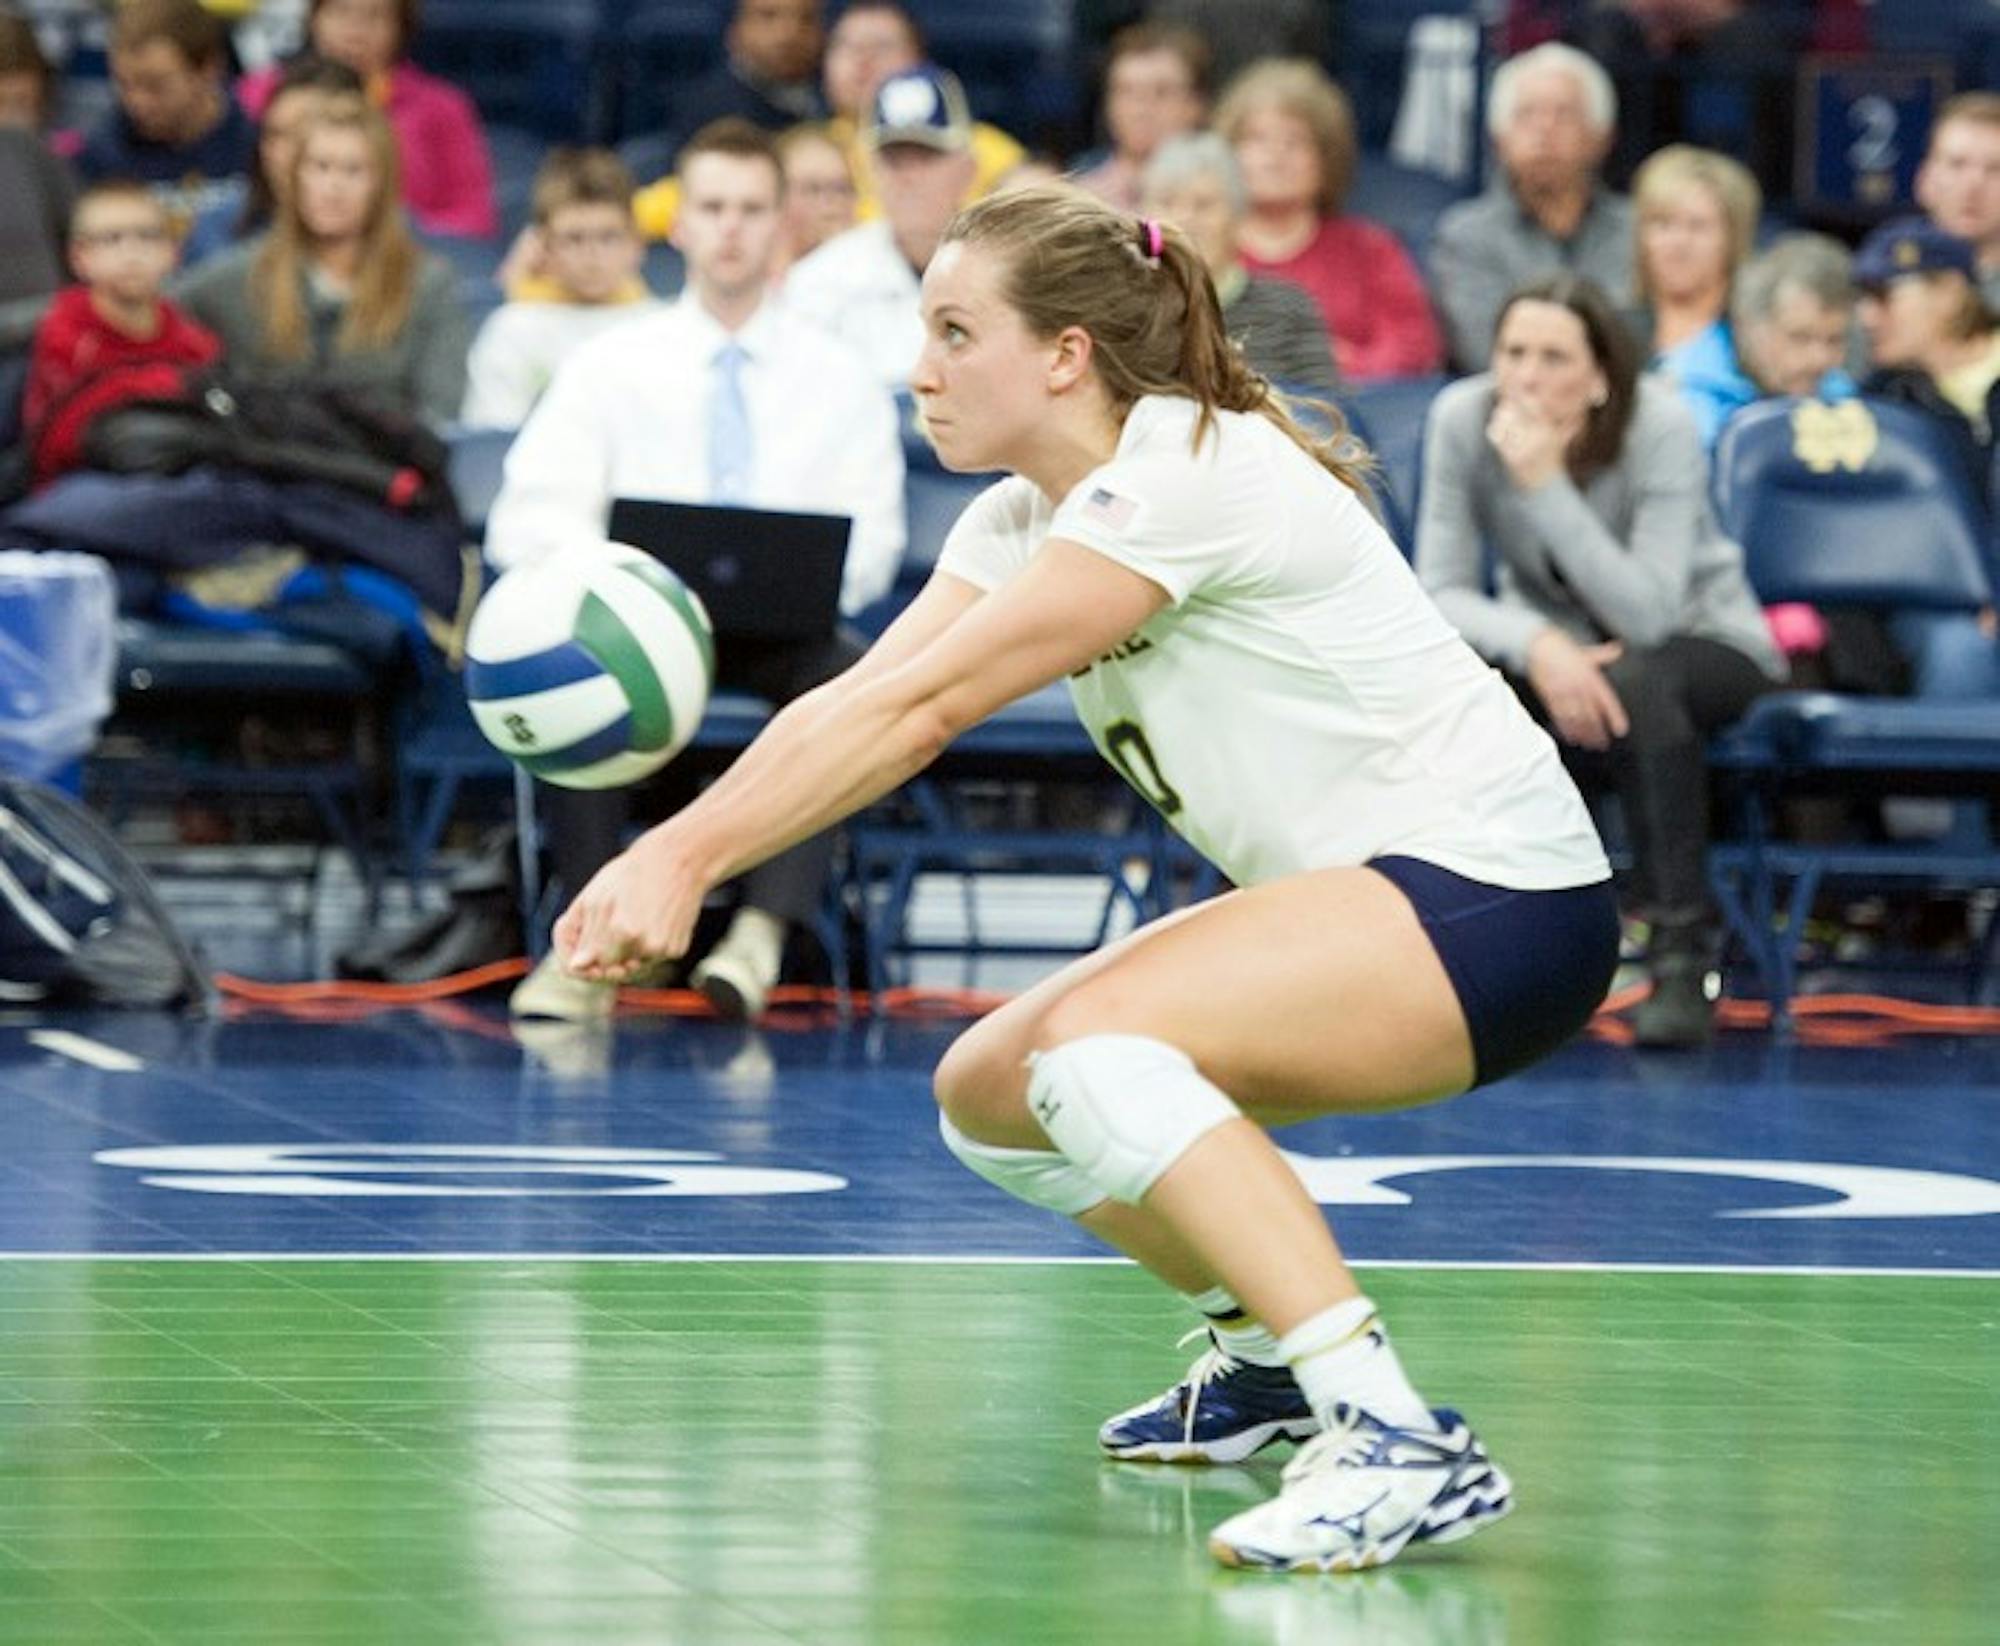 Irish senior libero Kathleen Severyn digs the ball during Notre Dame’s 3-0 loss to Pittsburgh on Friday at Purcell Pavilion.